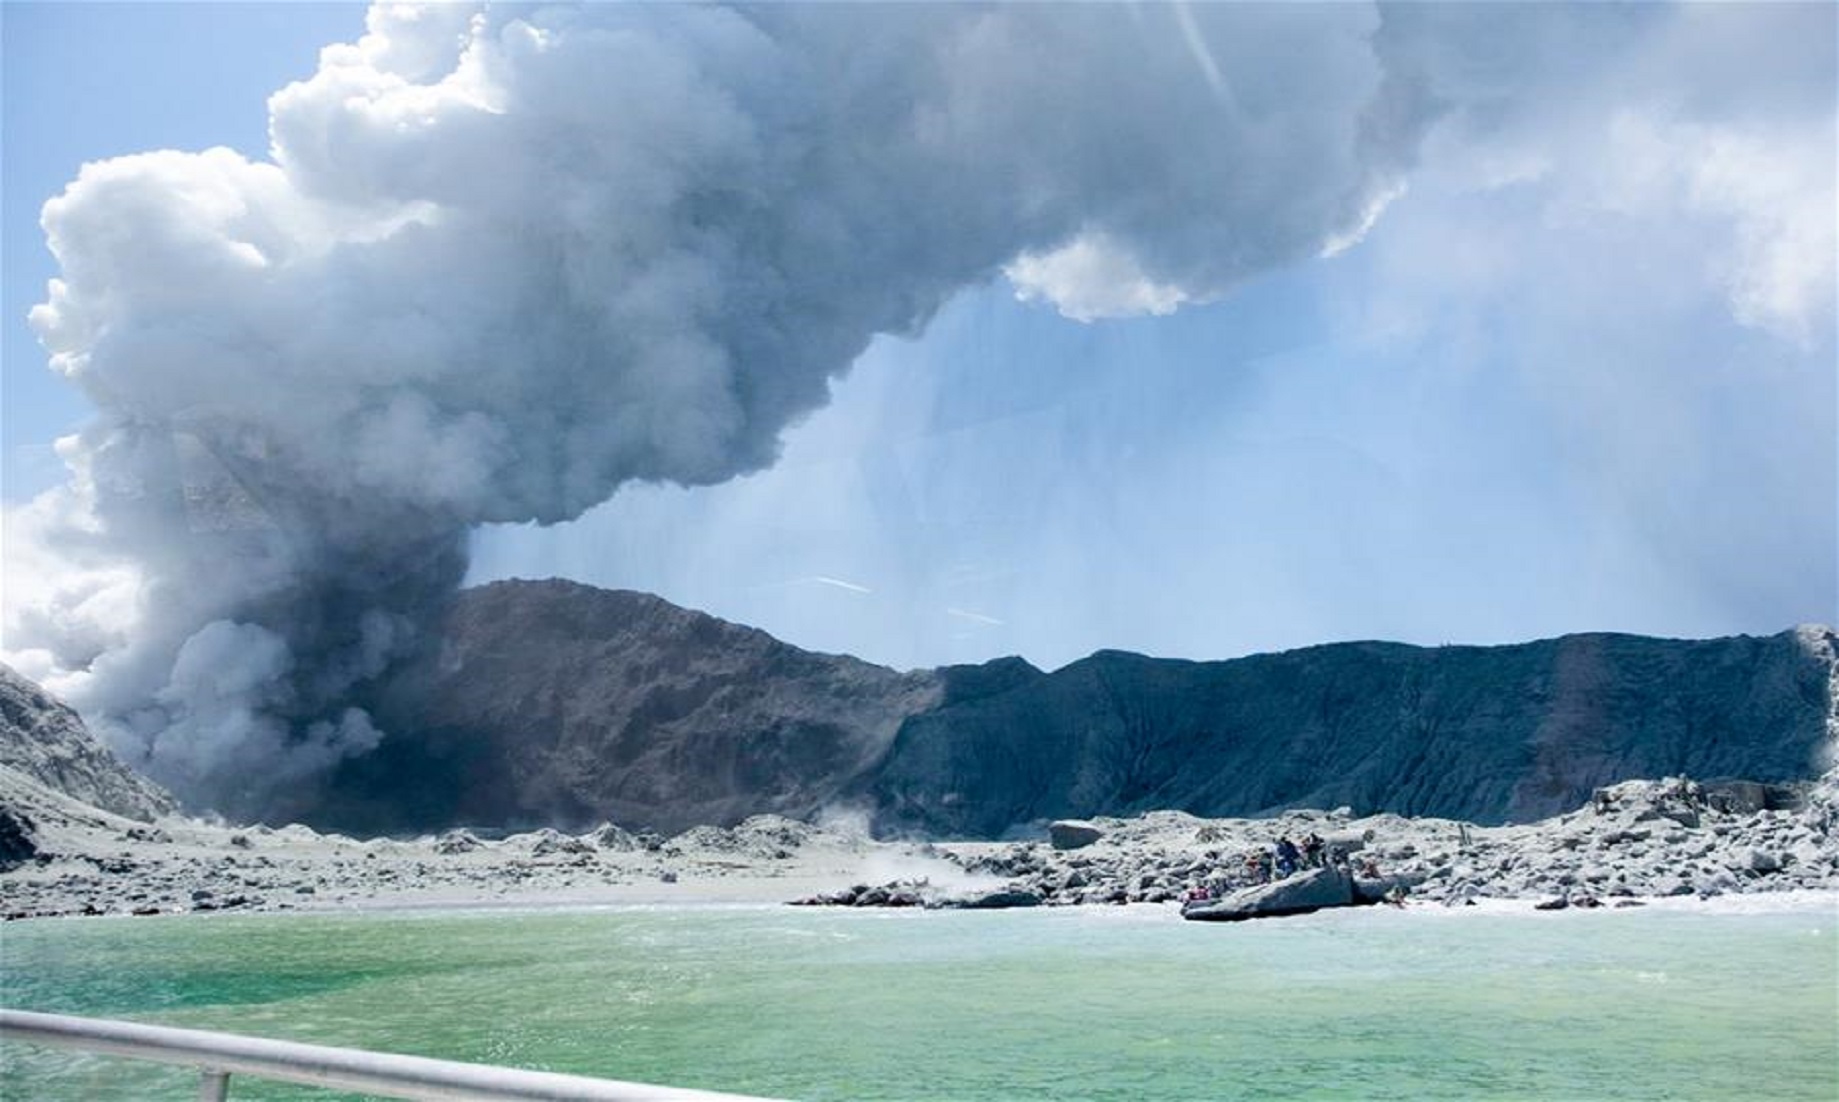 Update: New Zealand troops retrieve six bodies from volcano in daring mission